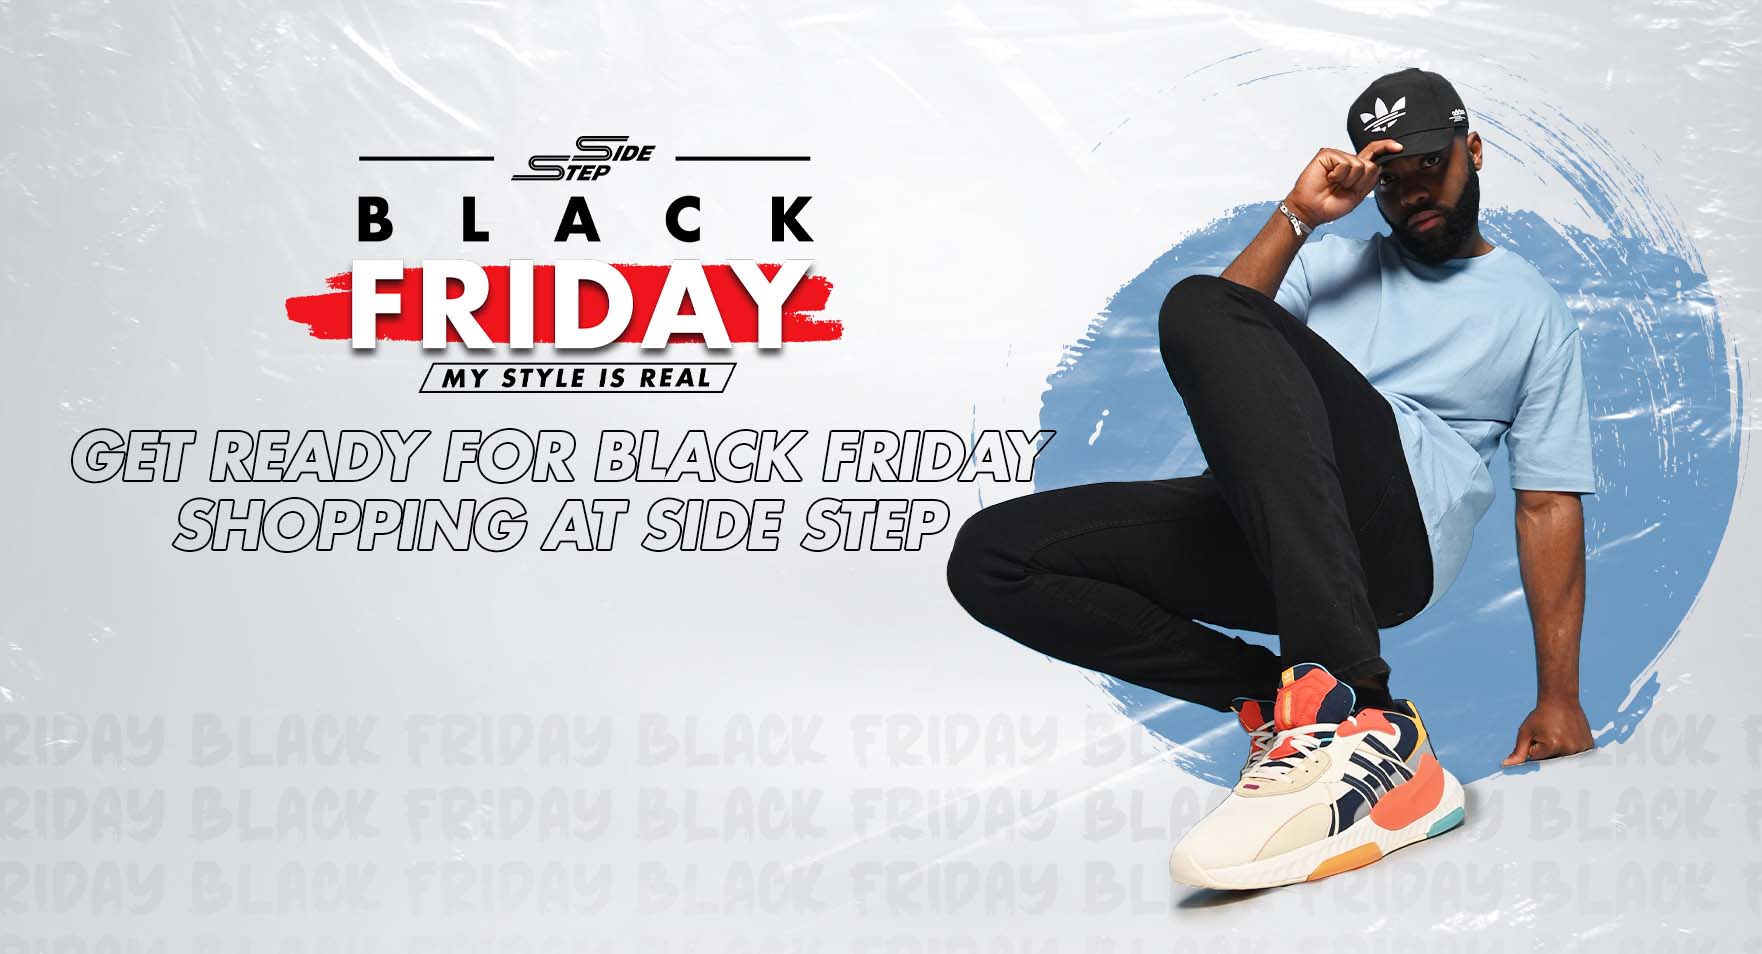 Get Ready for Black Friday Shopping at Side Step